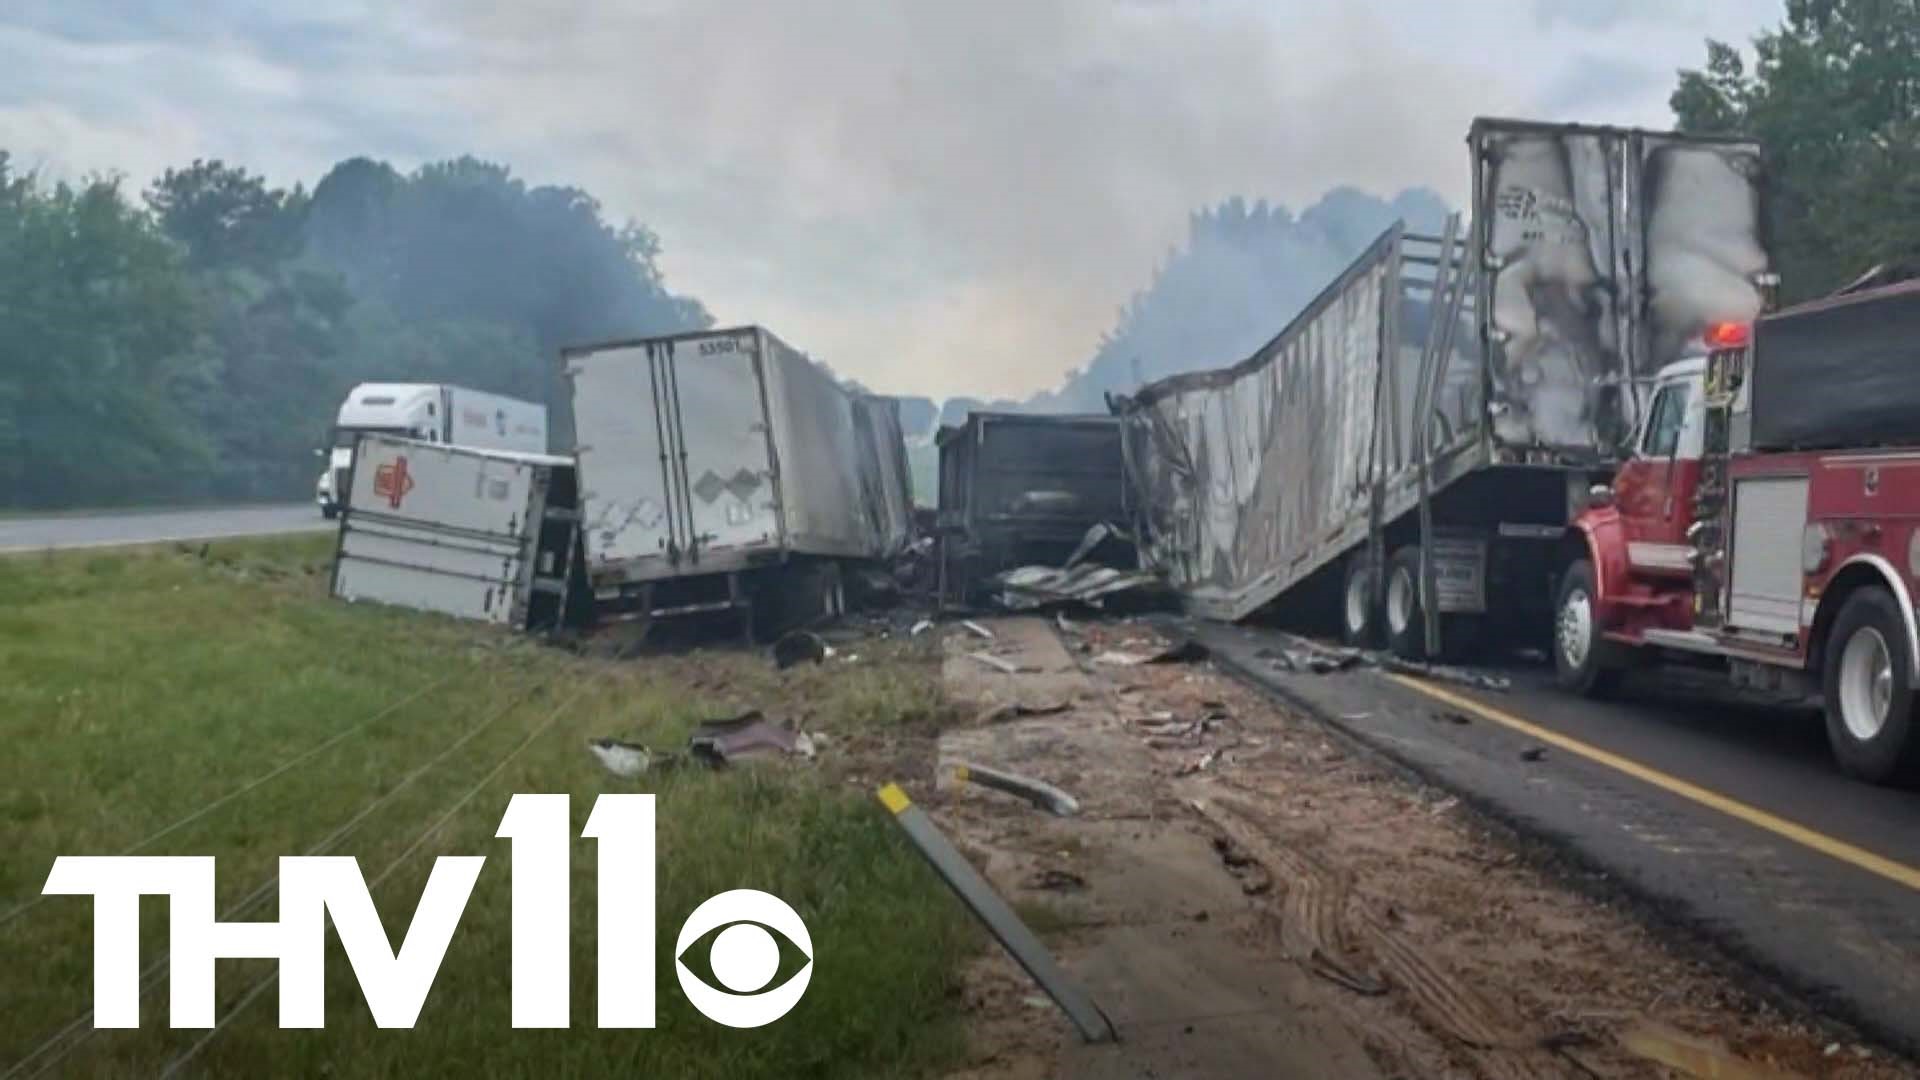 Arkansas crews finished repaving roads following a deadly crash involving 8 18-wheelers, resulting in 3 people dying.